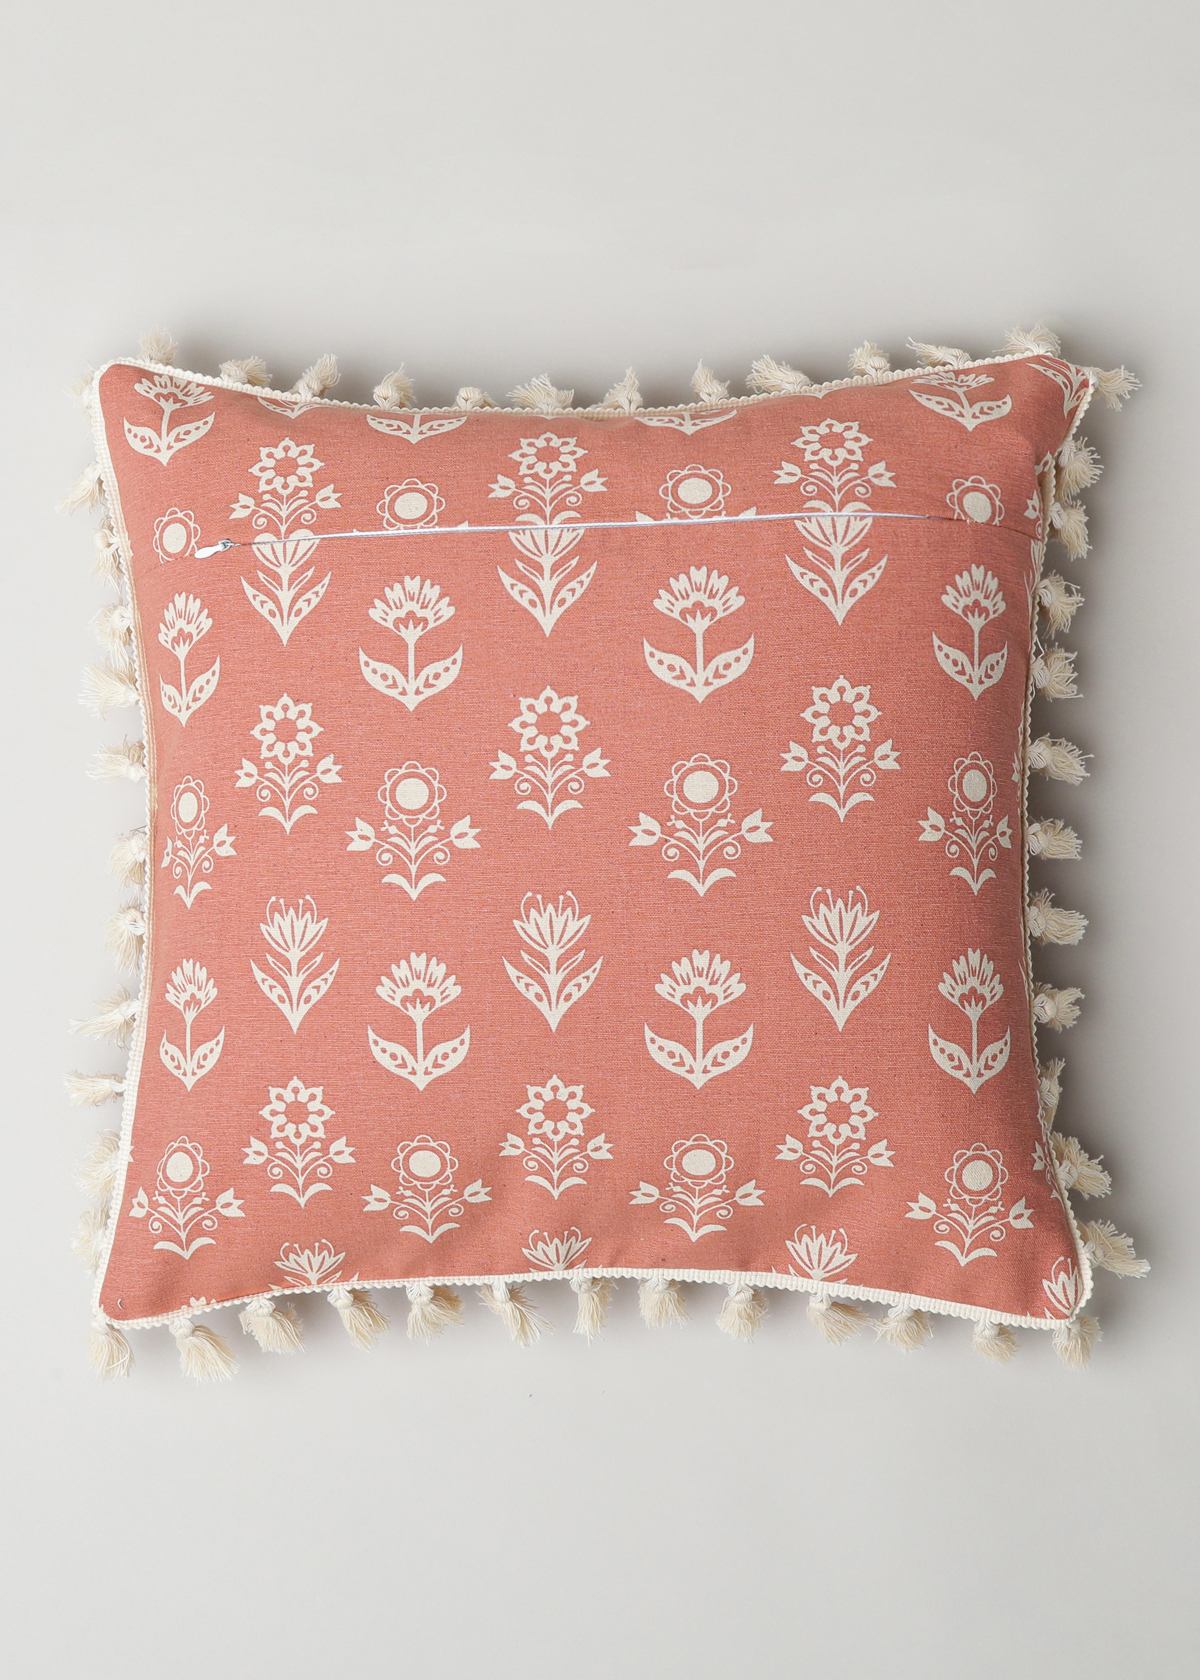 Dahlia Printed 100% cotton floral cushion cover for sofa with tassels - Rust